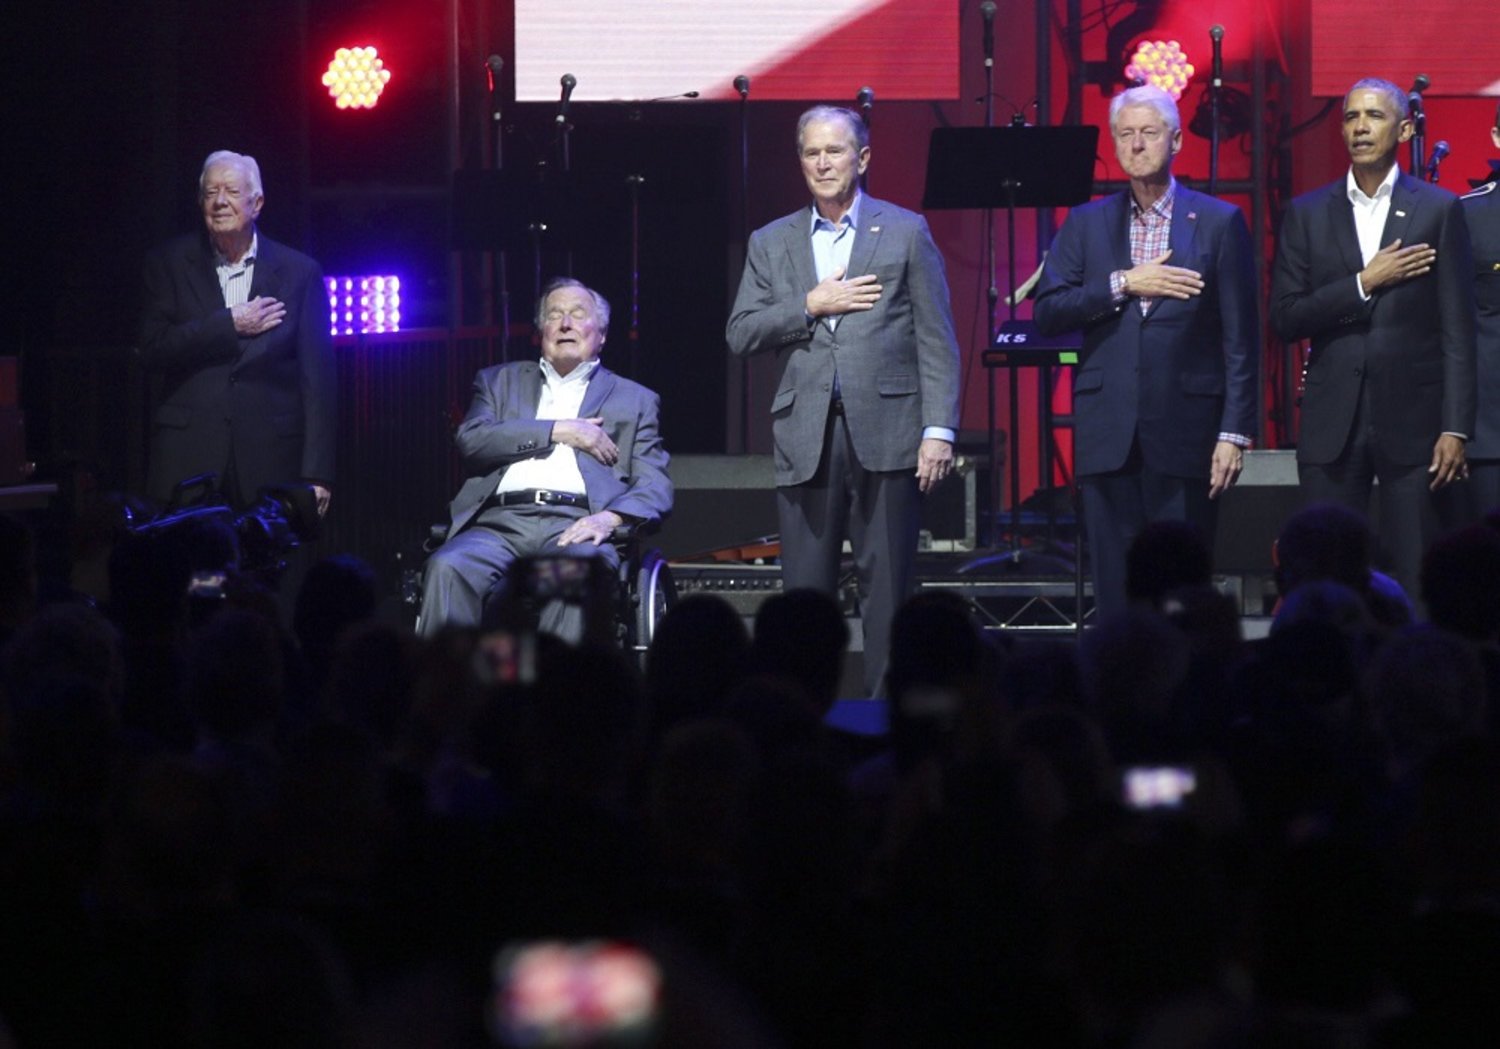 Ex-presidents Barack Obama, Bill Clinton, George W. Bush, George H.W. Bush and Jimmy Carter place their hands on their chest for the national anthem at the opening of a hurricanes relief concert in Texas. (AP)